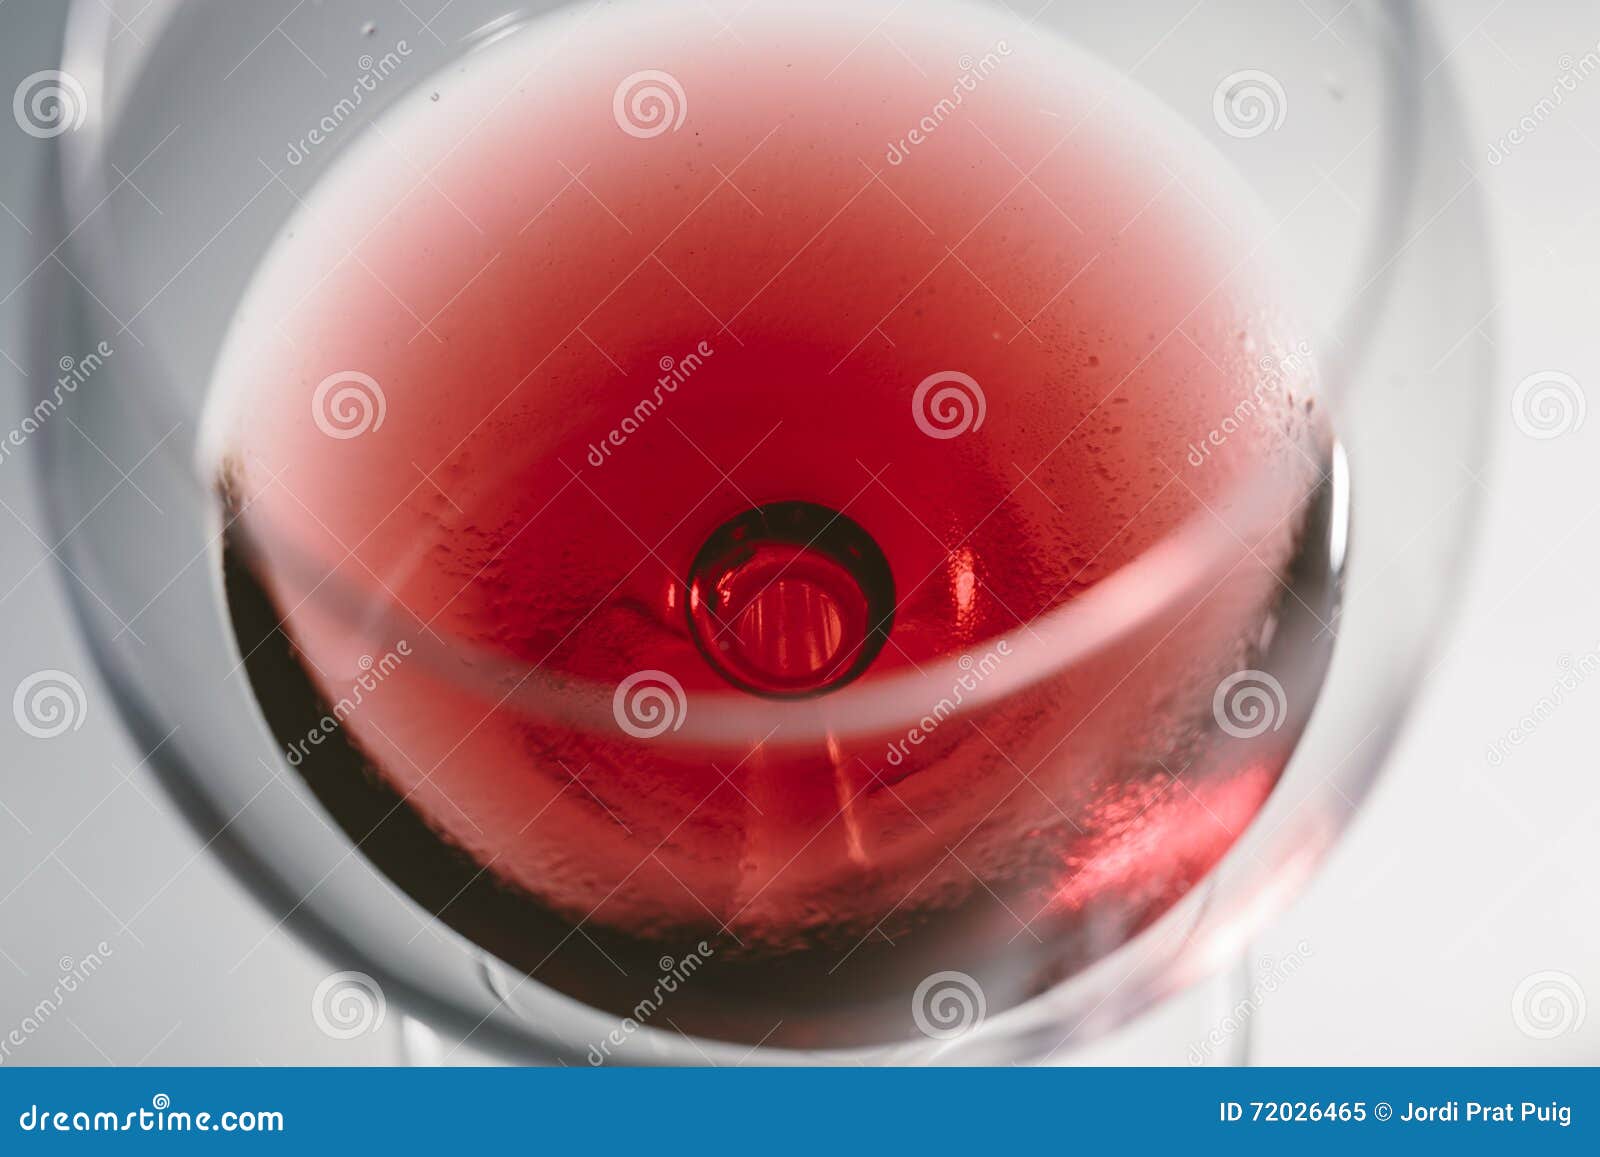 red wine on a wineglass close up